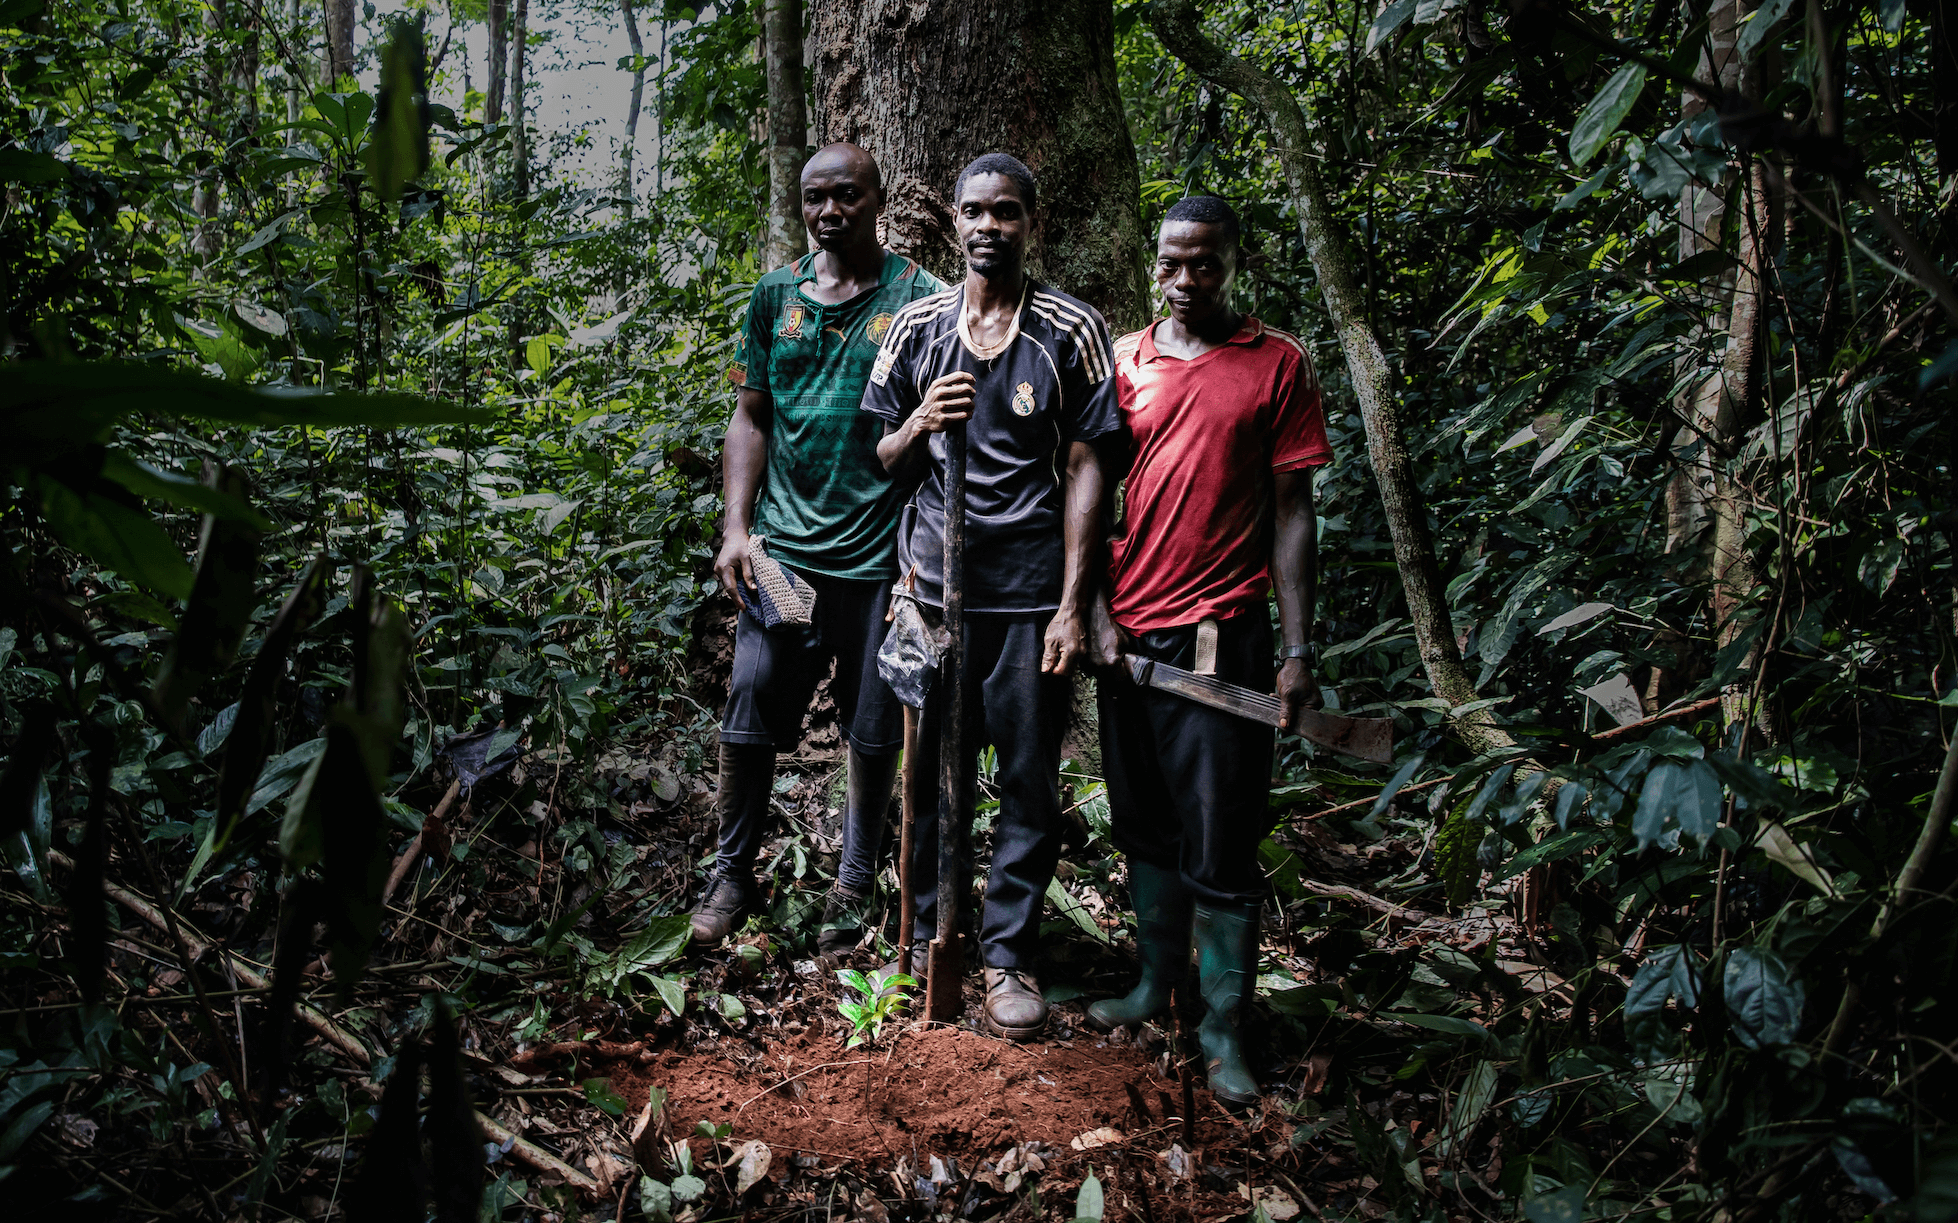 Taylor Guitars makes history with largest planting of Ebony trees in Congo Basin